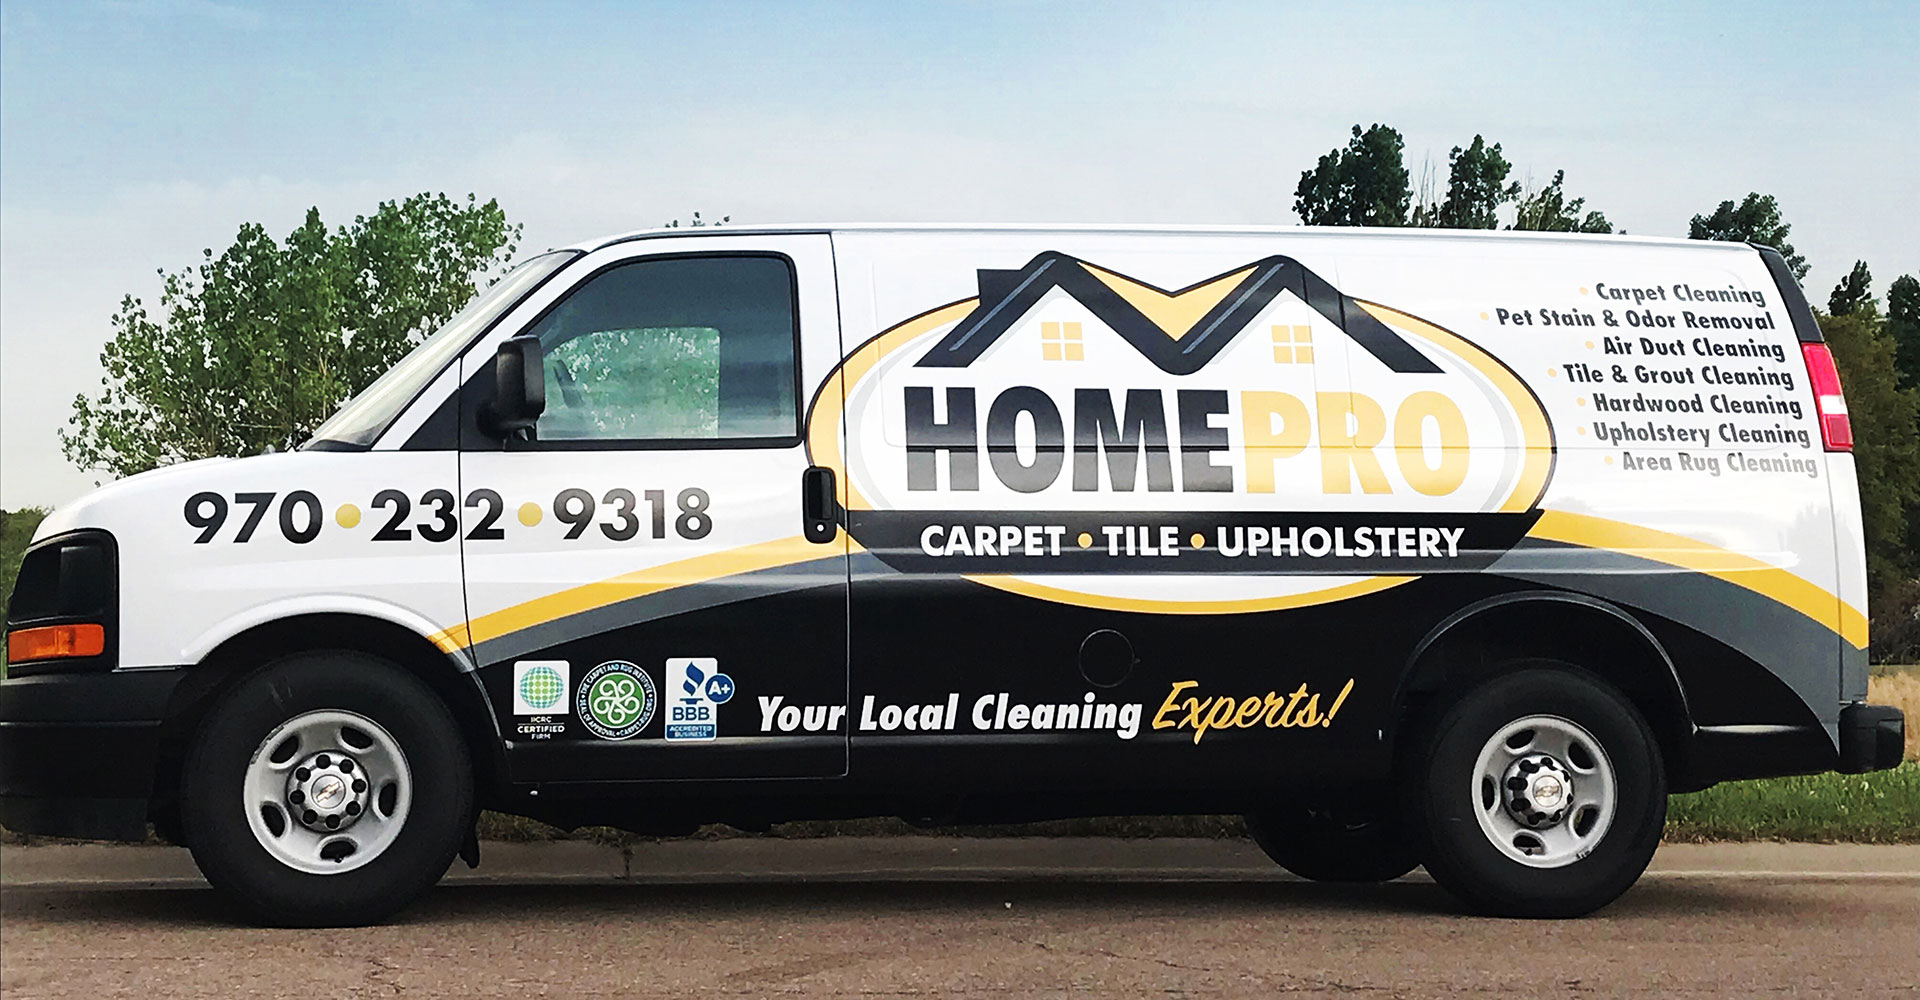 Carpet Cleaning Fort Collins Colorado 1 1